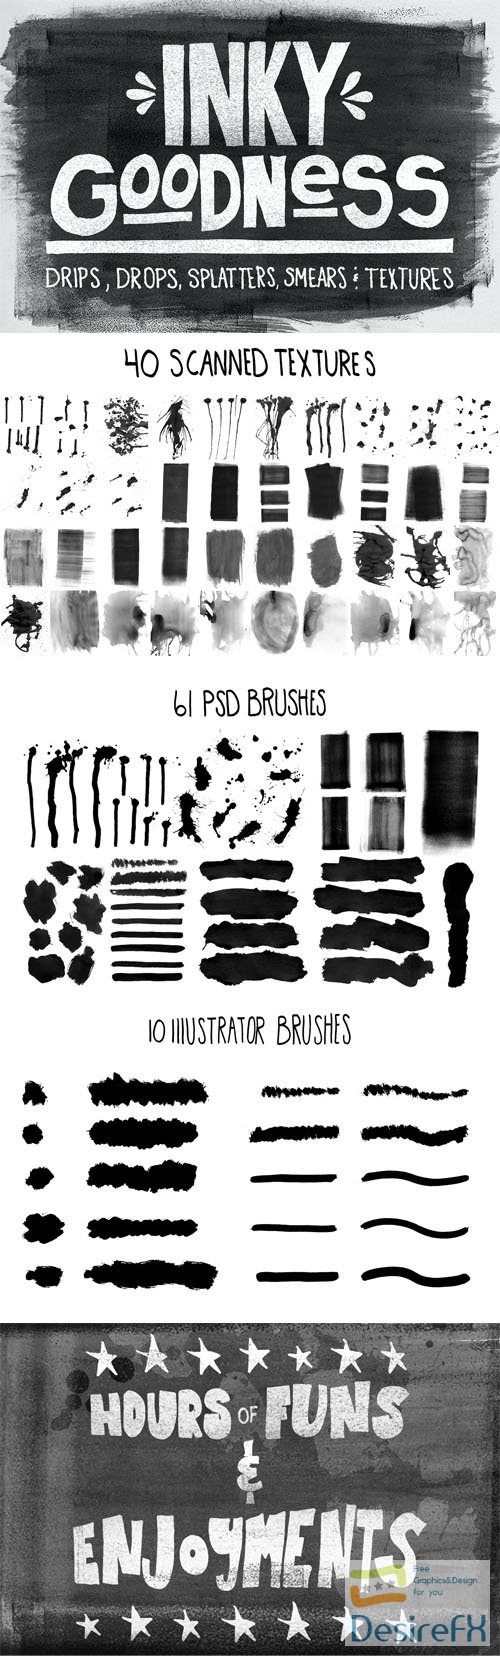 Inky Goodness Brushes for Photoshop &amp; Illustrator + Textures